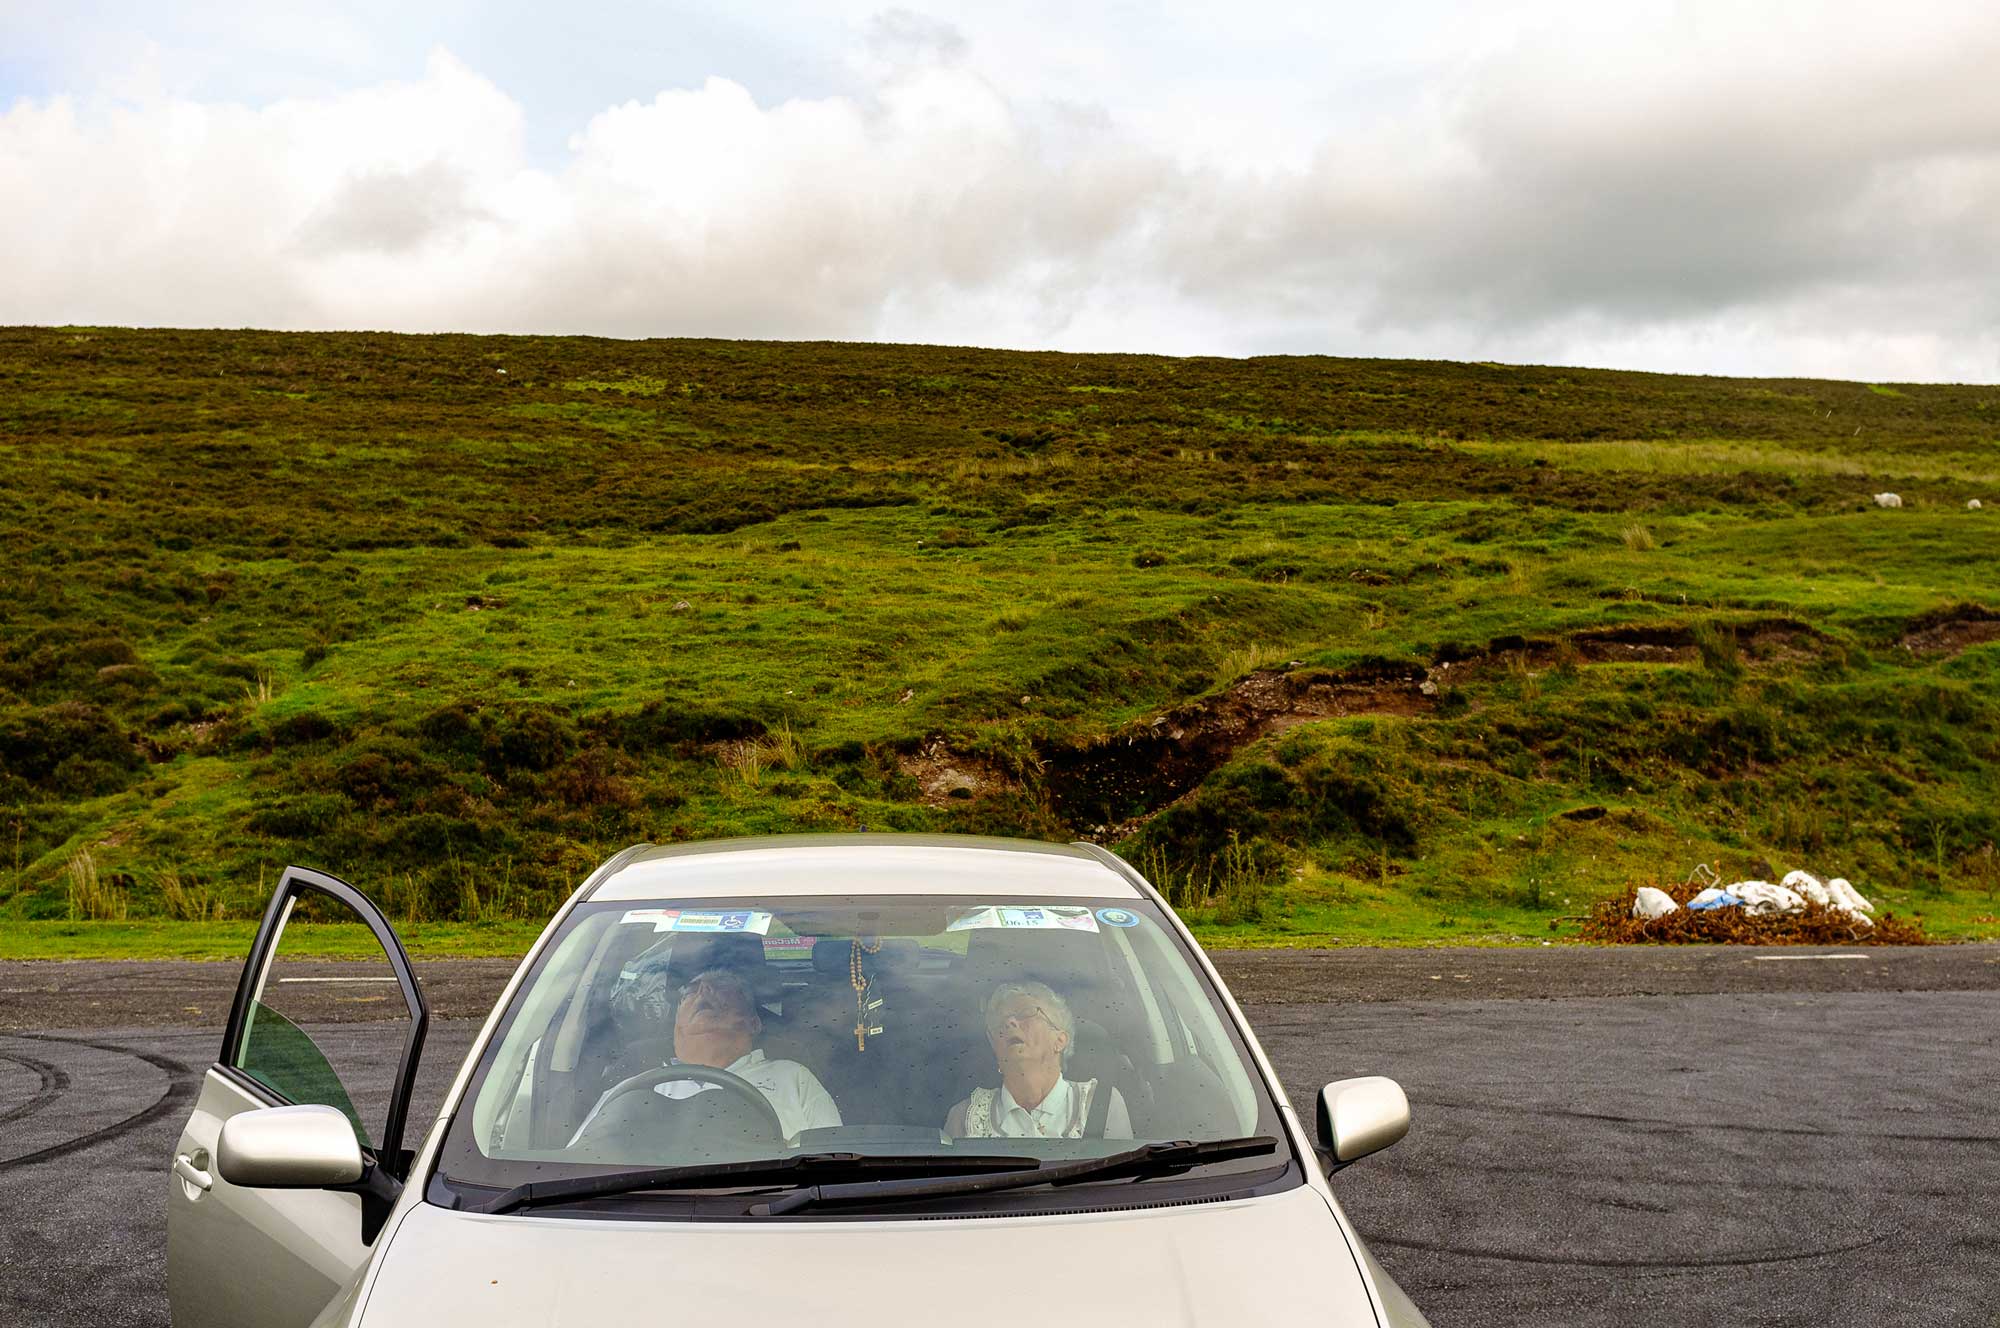 Old couple parked and asleep in a silver car in front of a lush green hill on a cloudy day.